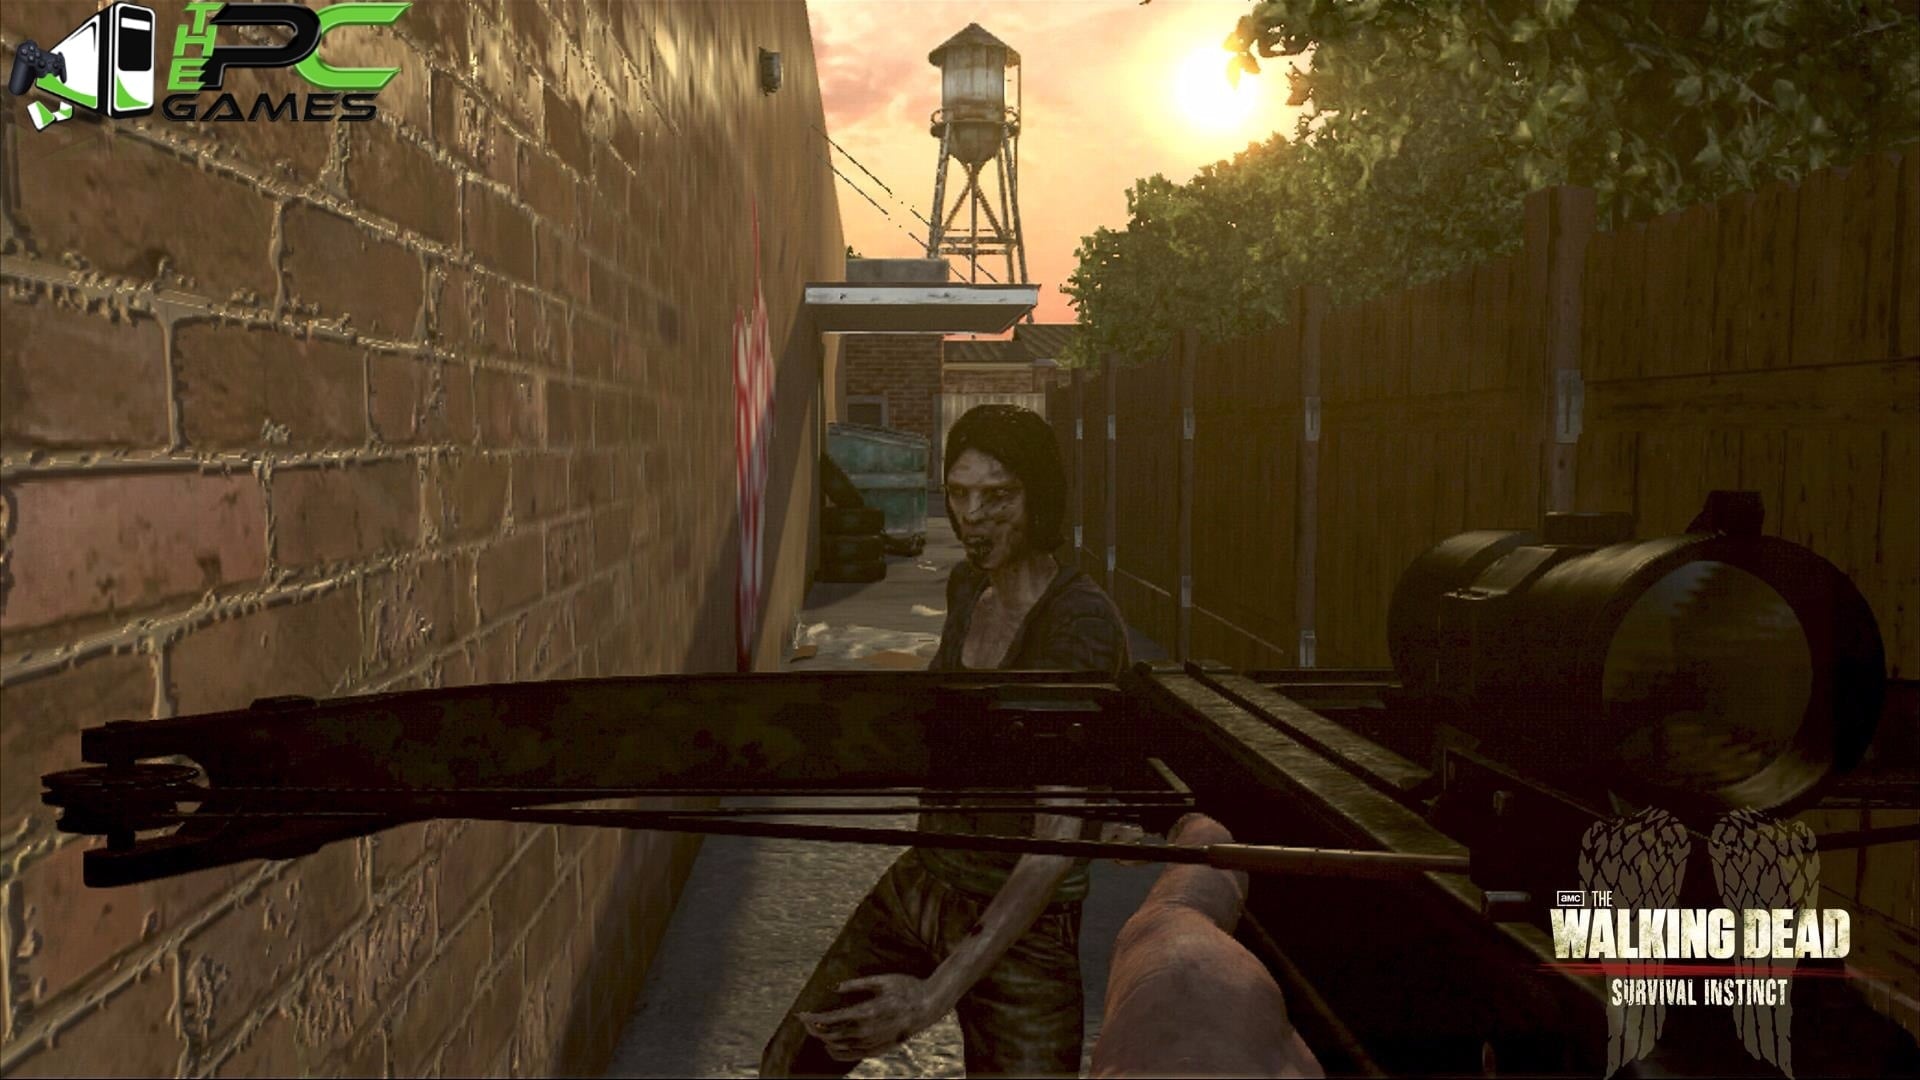 download game the walking dead free pc